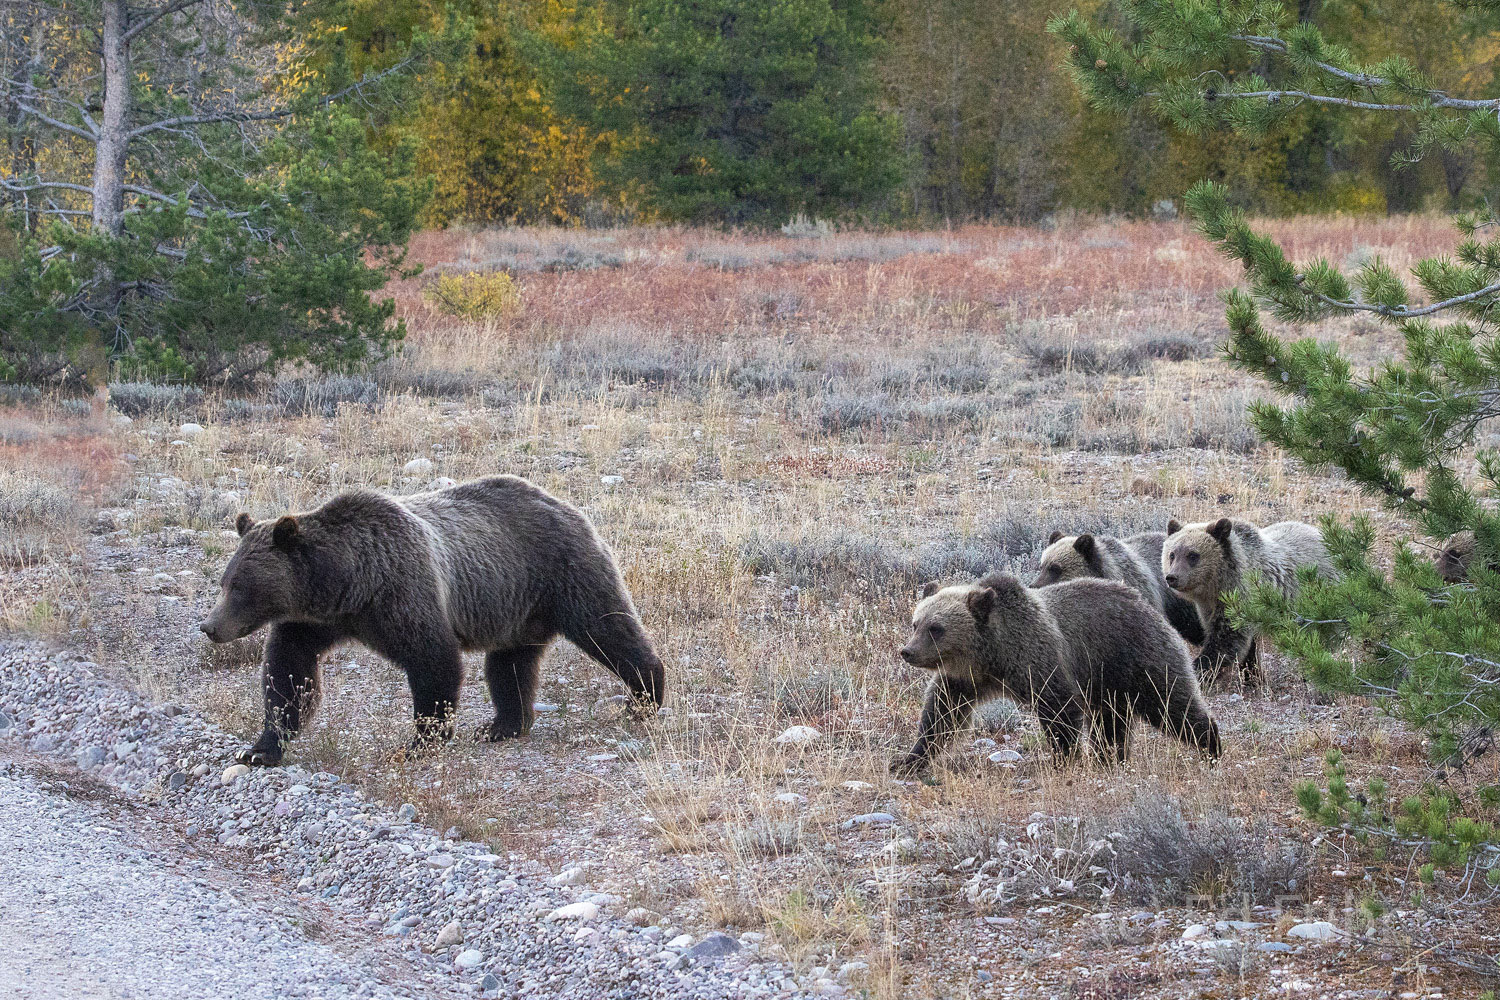 Grizzly 399 leads her quad cubs from the nearby forest into the open meadows across Pilgrim Creek.